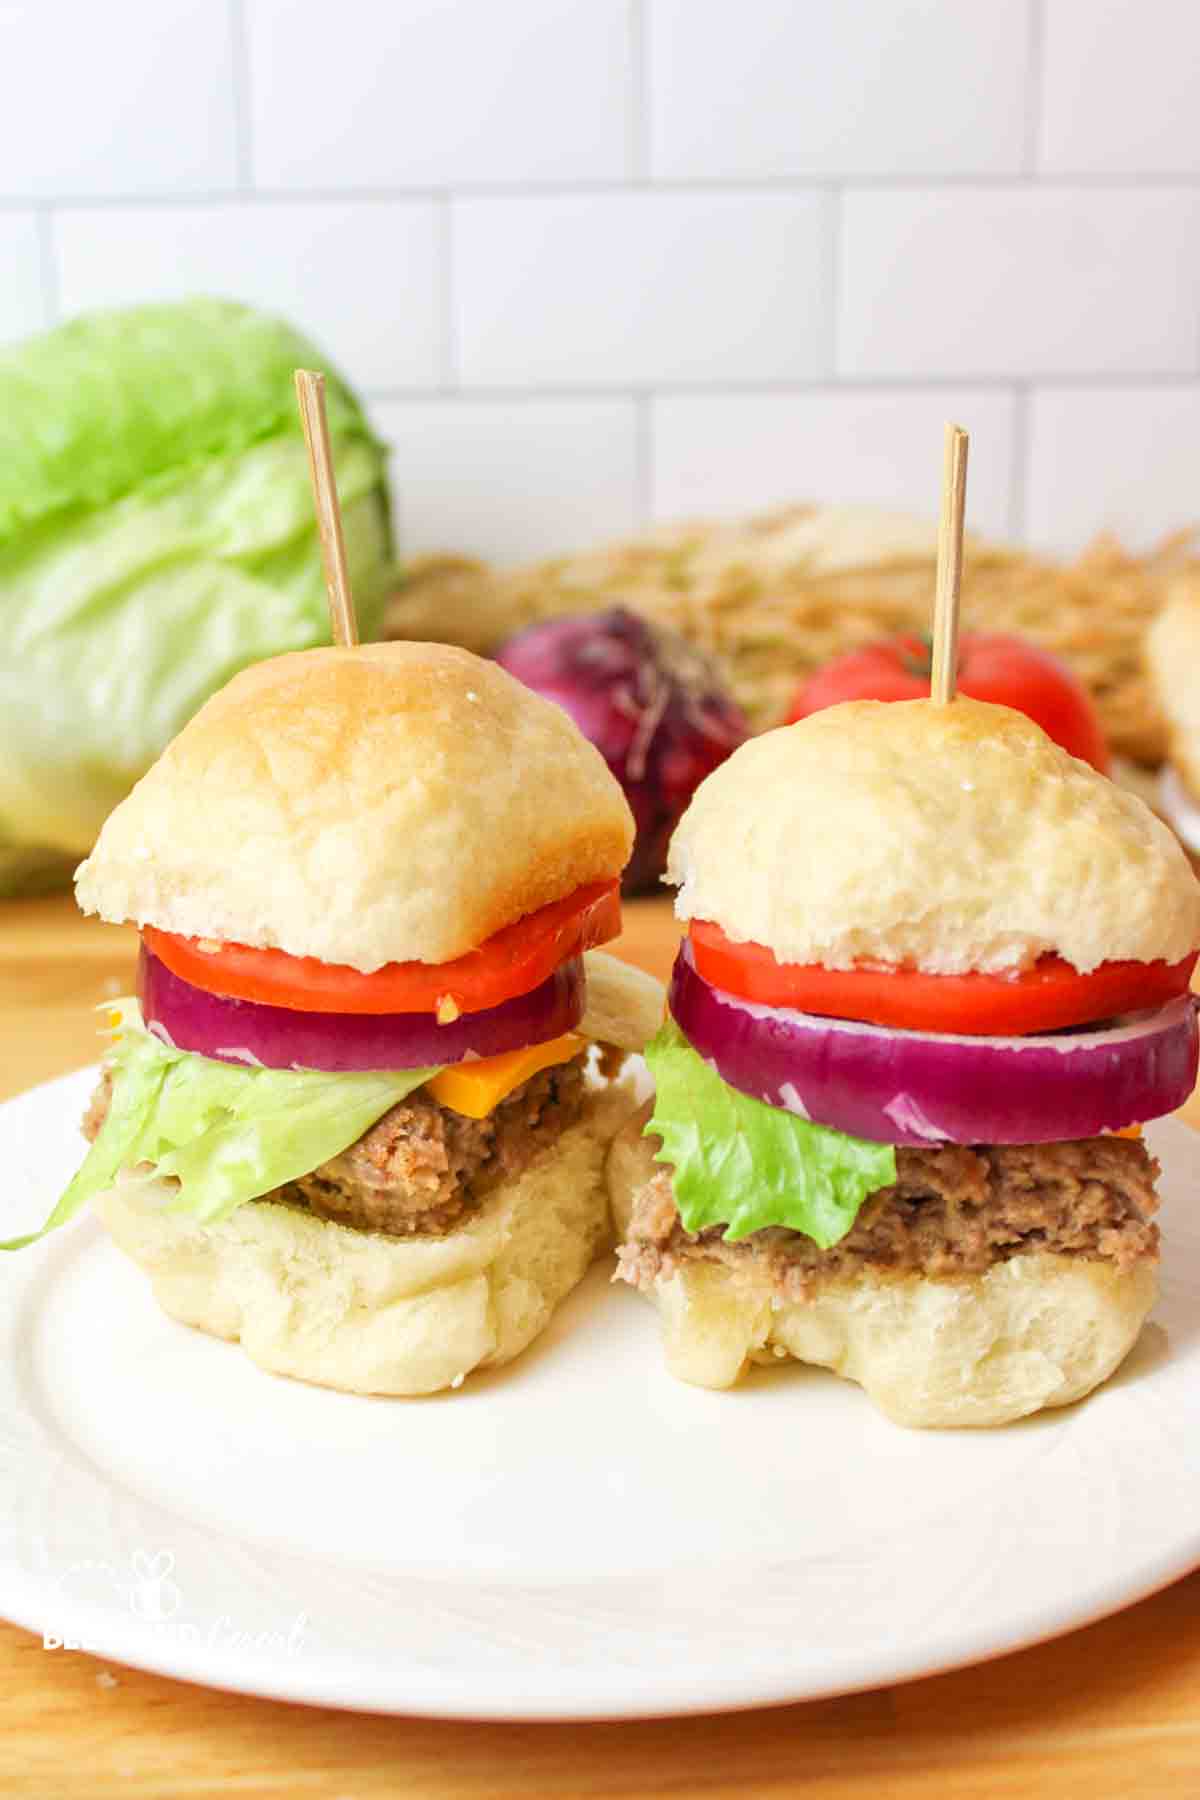 two hamburger sliders with homemade buns and toothpicks holding them together.